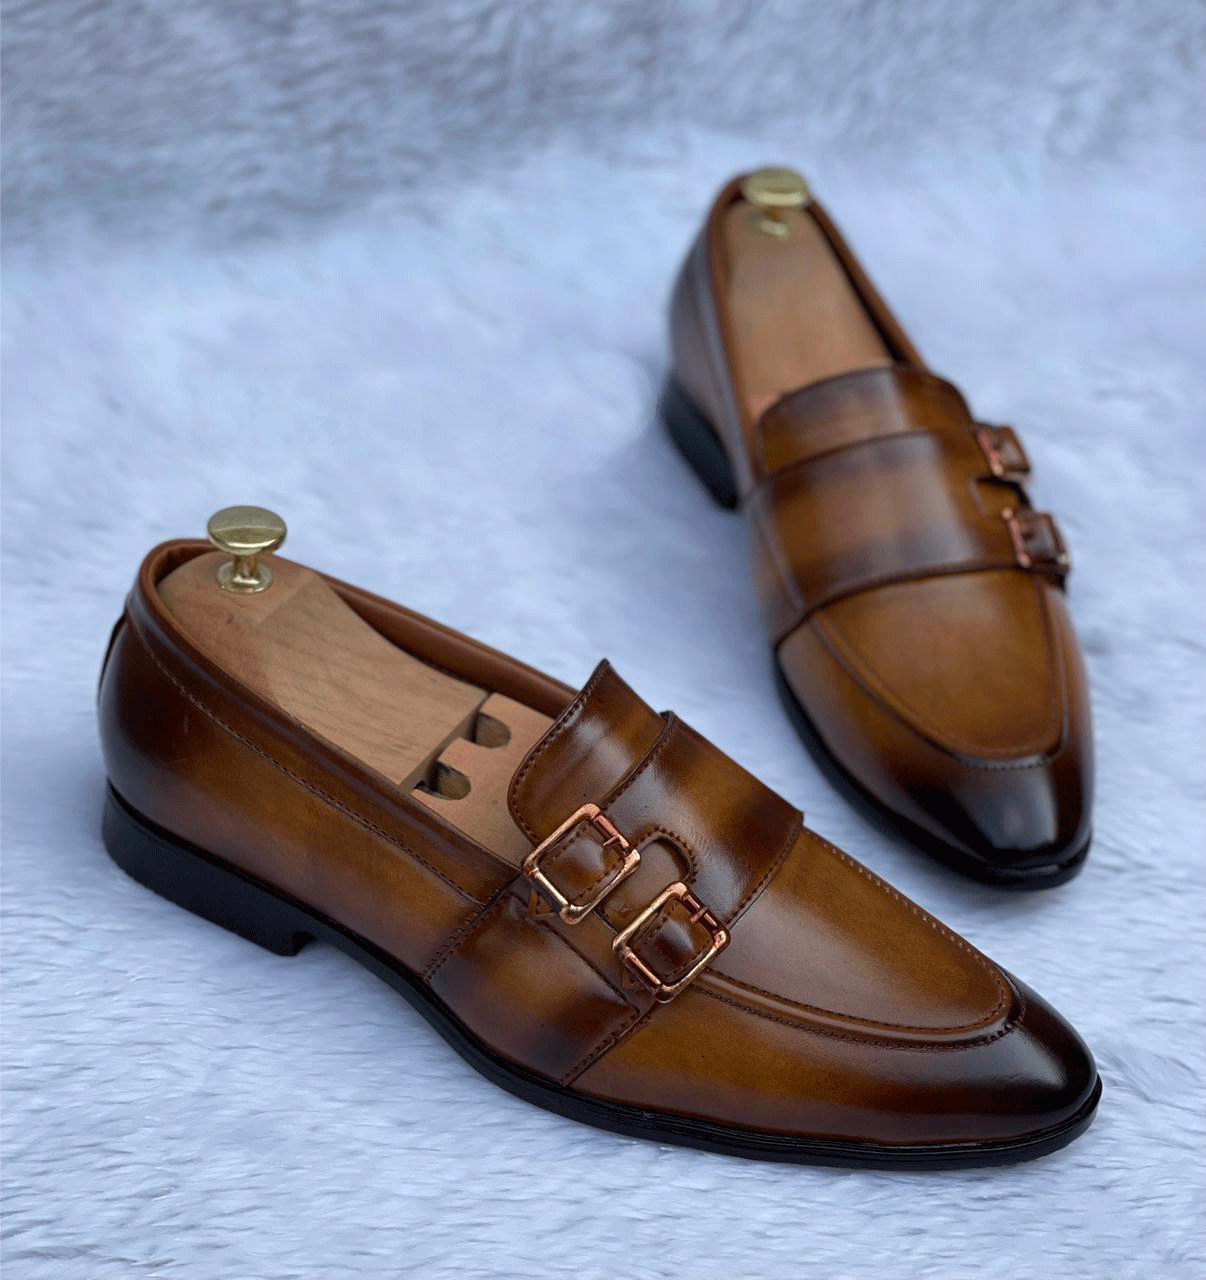 Classic Patent Monk Formals With Tassels For Men-JonasParamount